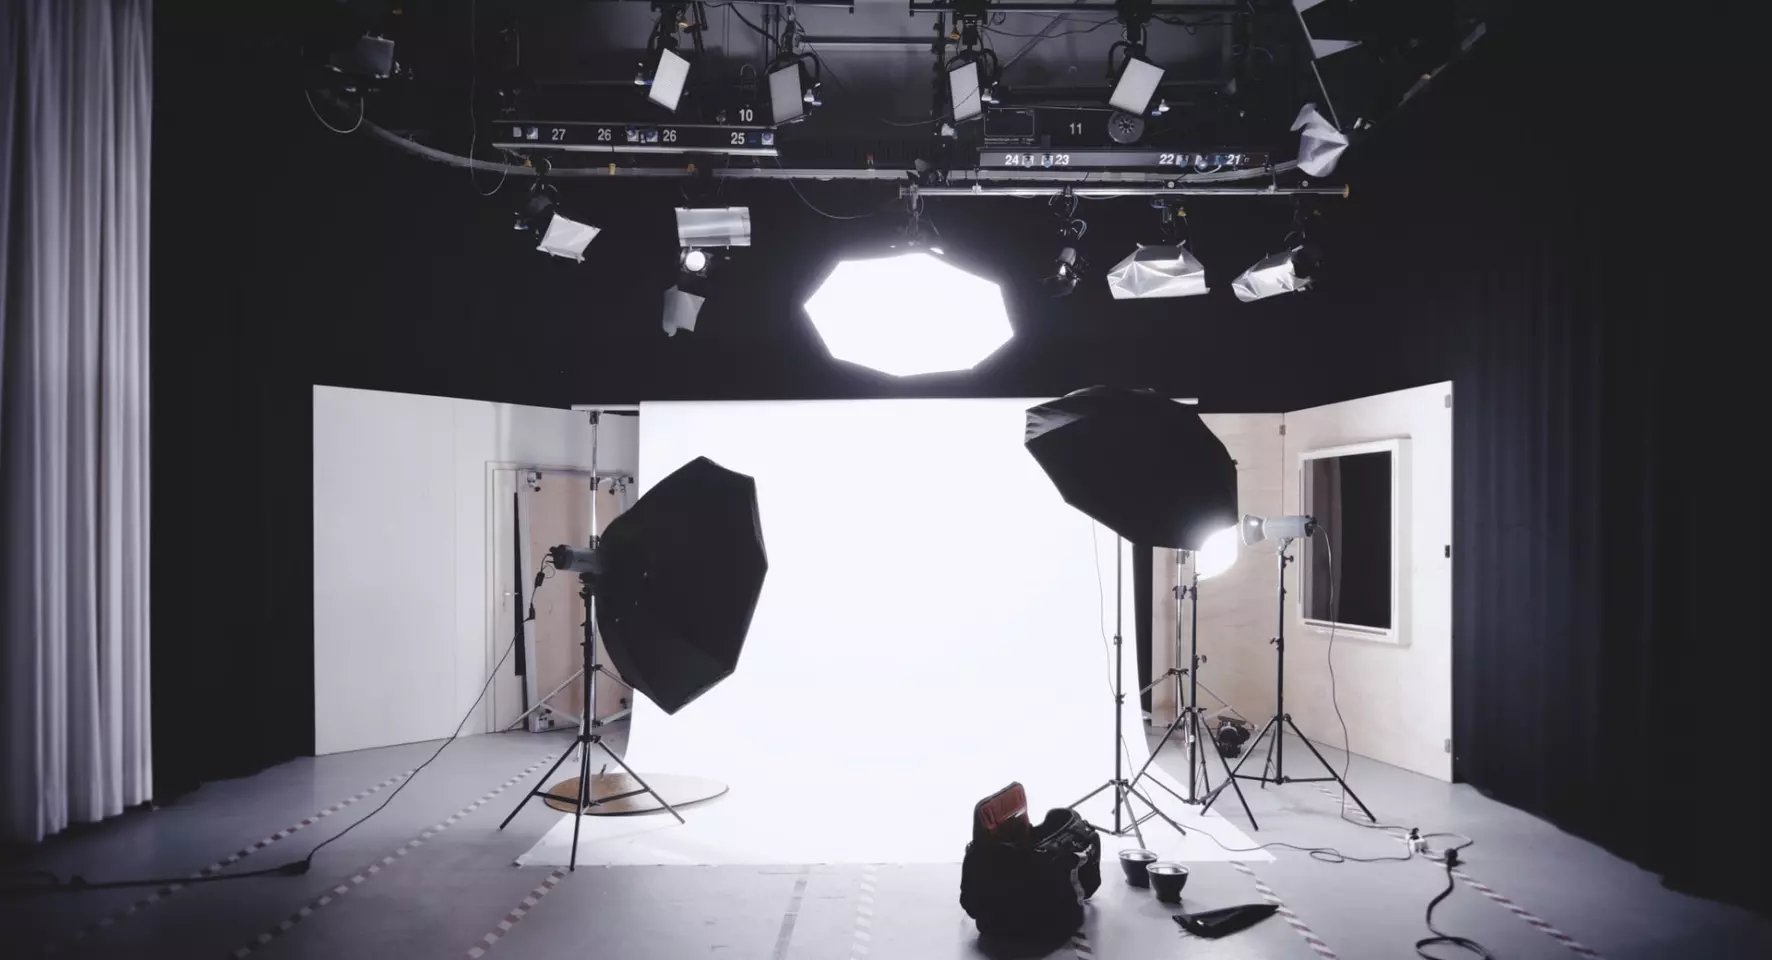 A photography studio setup during an internship for photography students in Ireland